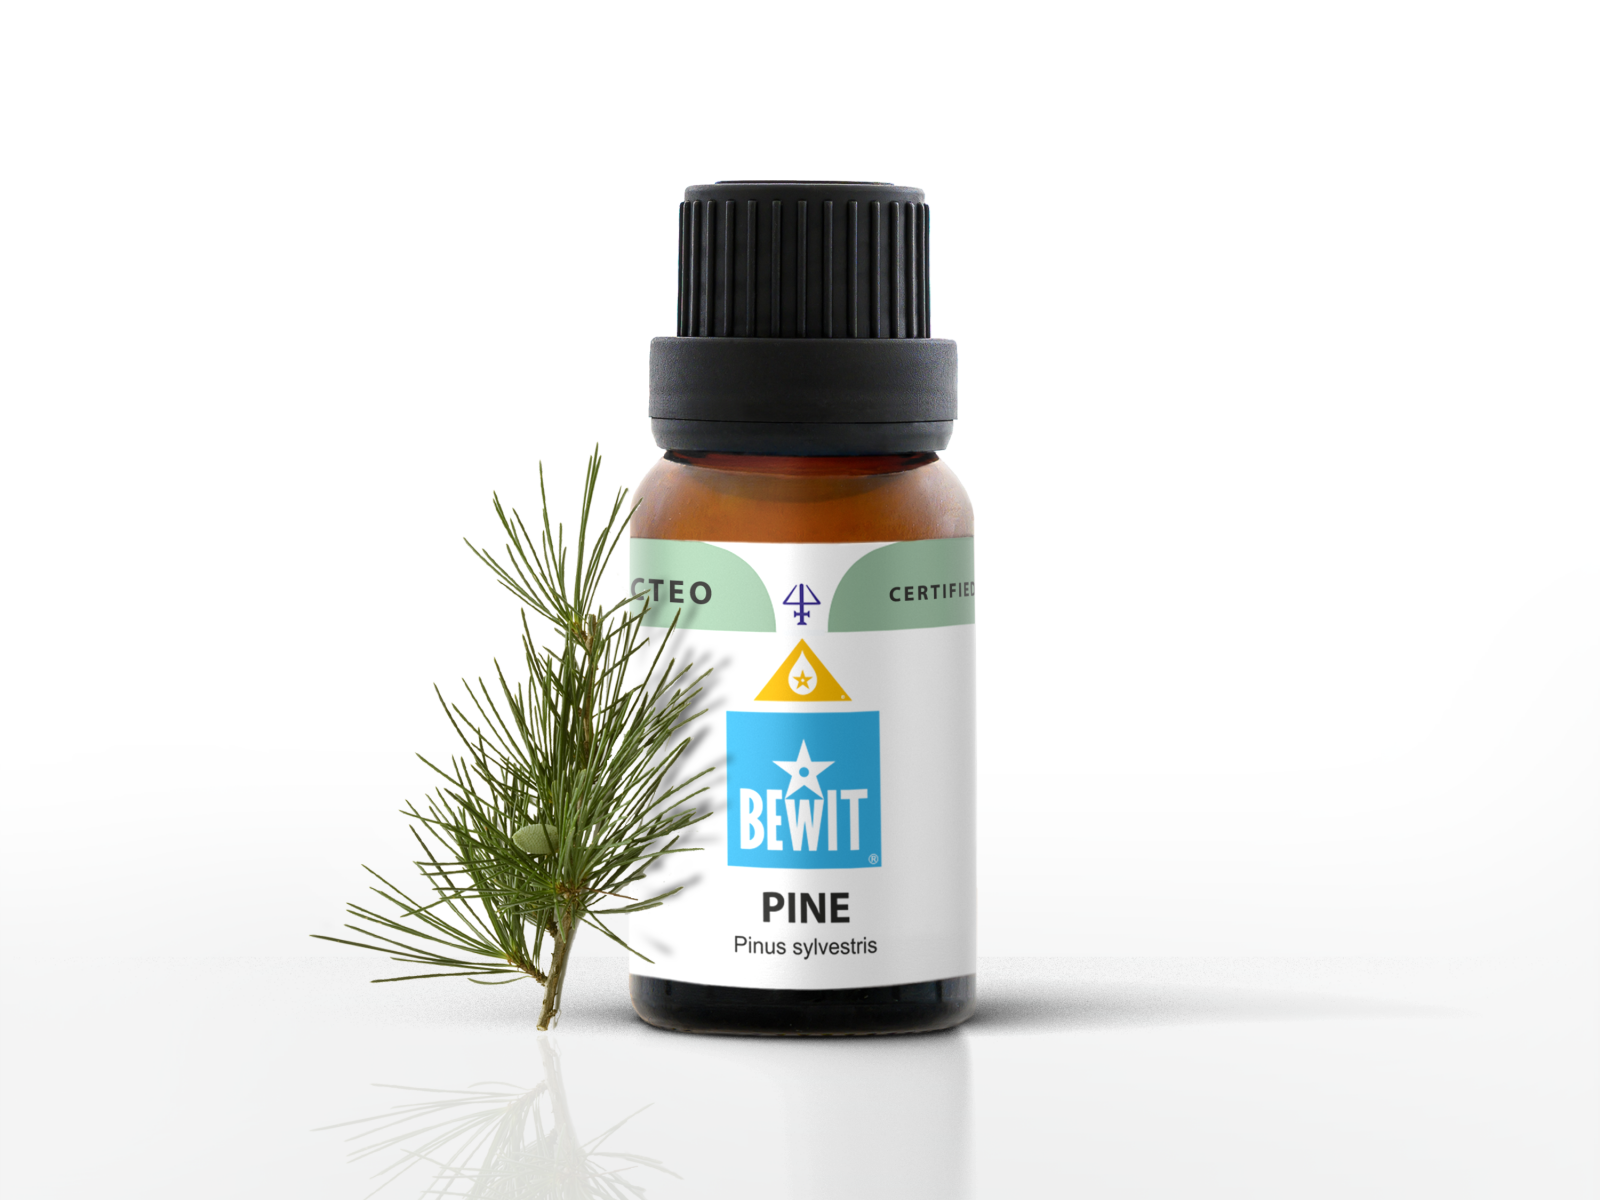 Pine - This is a 100% pure essential oil